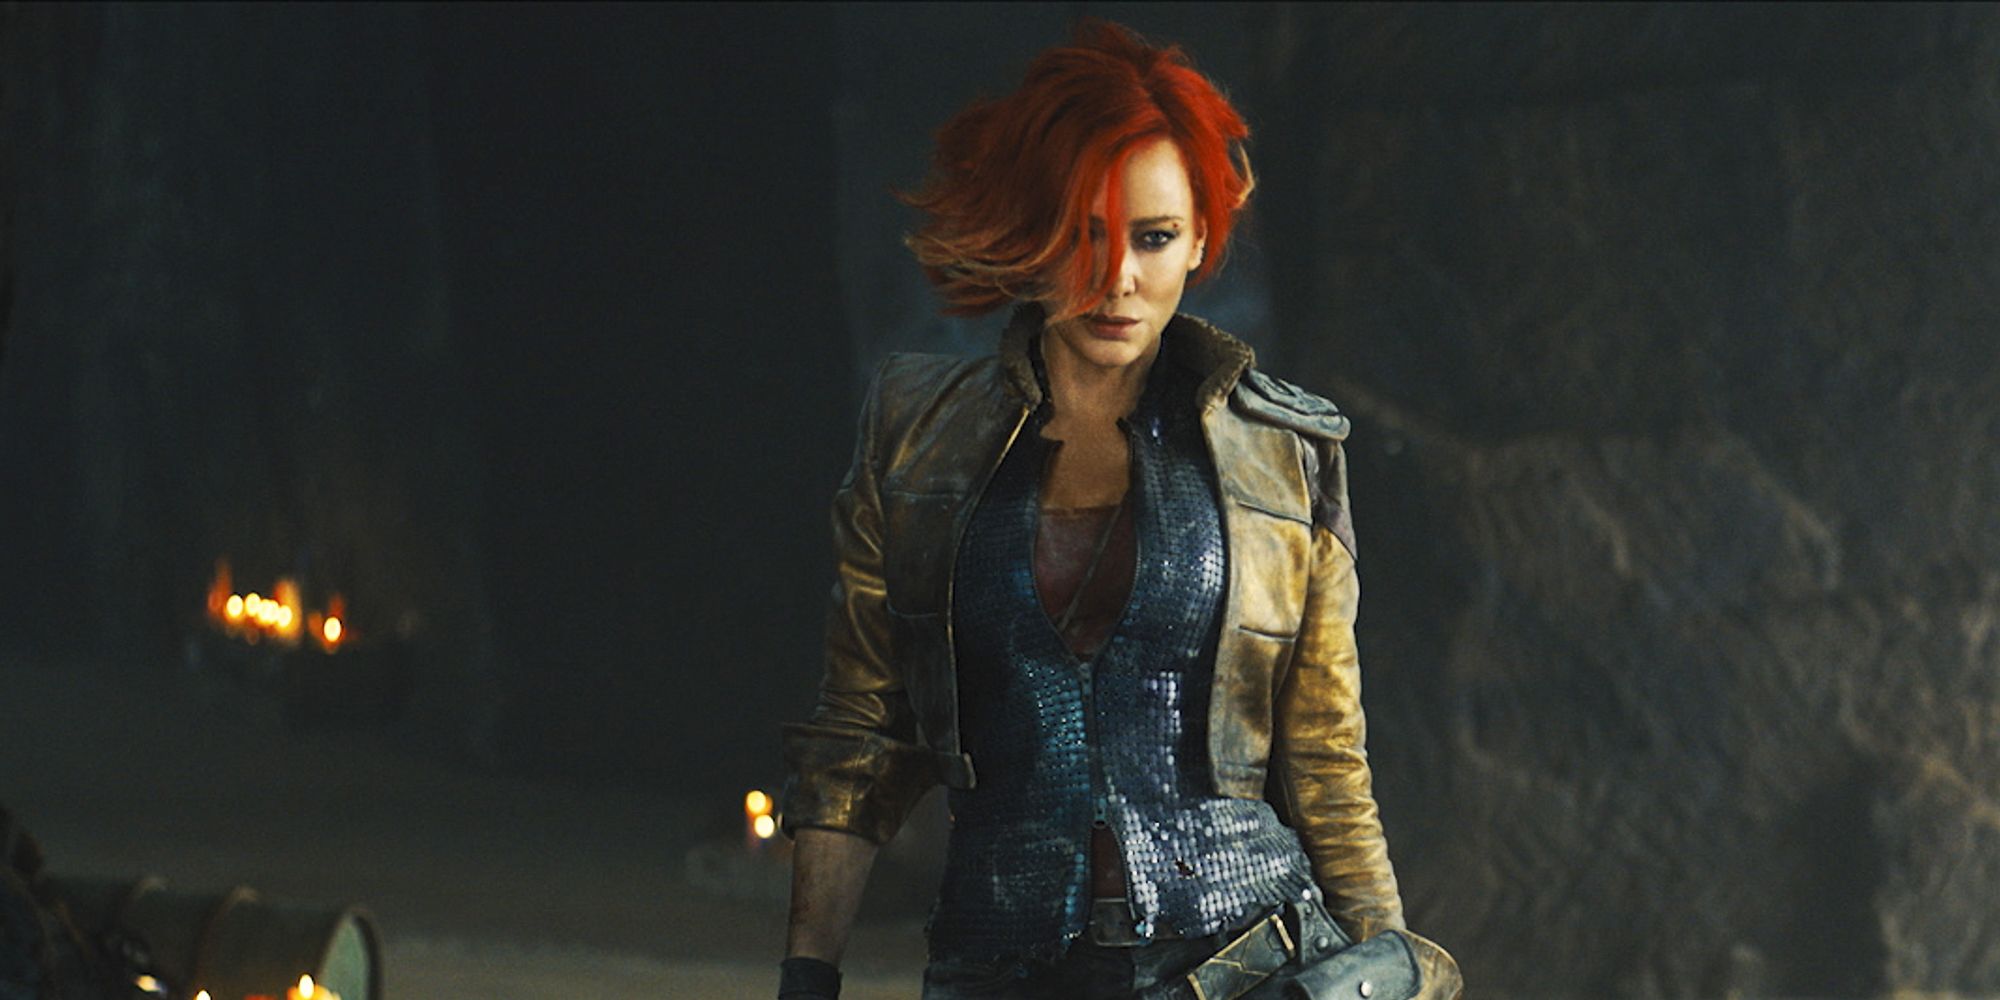 Cate Blanchette as Lilith in the Borderlands movie, walking towards the camera while her red hair swoops